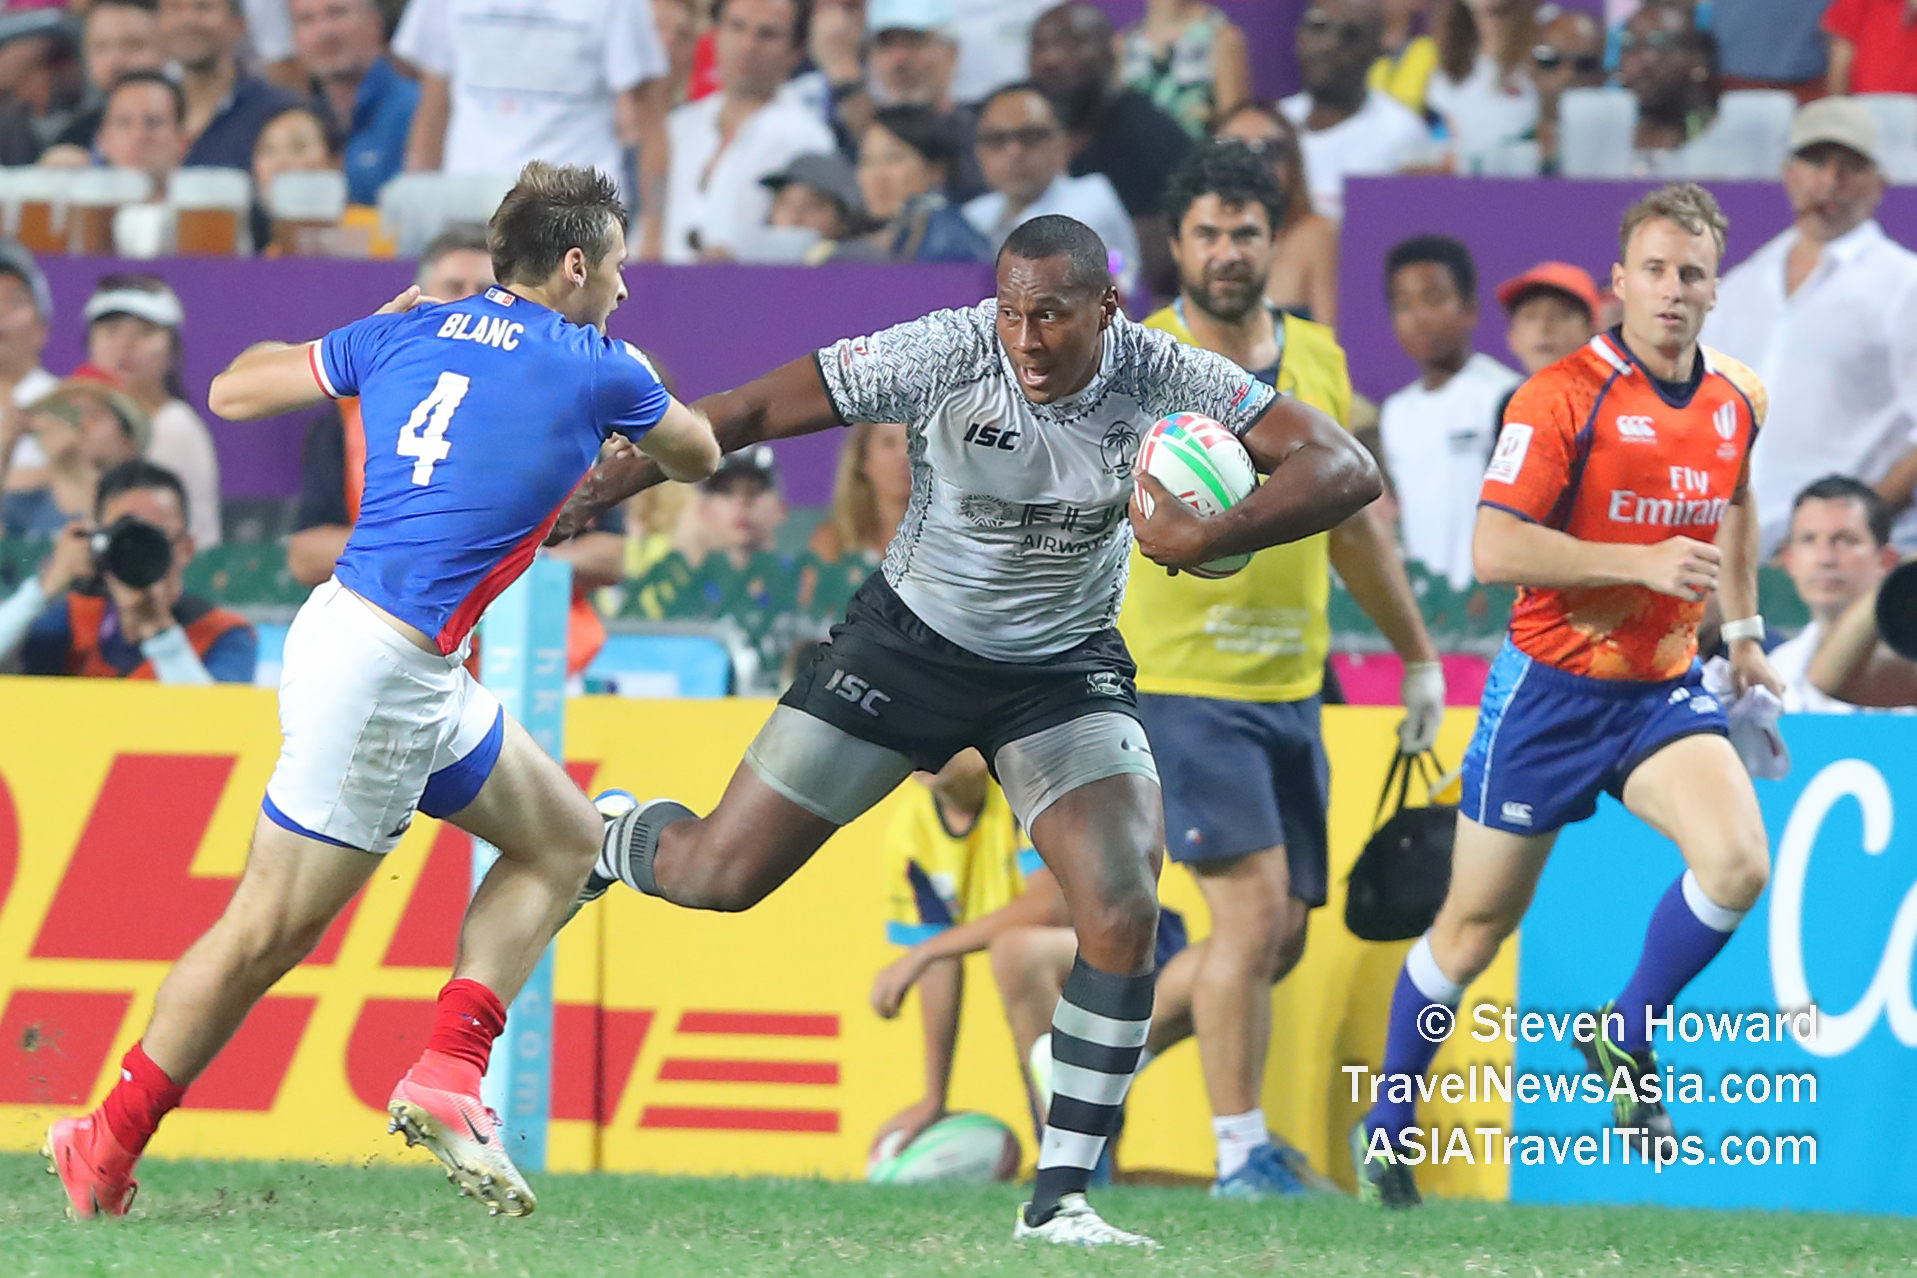 Action between Fiji and France at the Cathay Pacific / HSBC Hong Kong Sevens 2019. Picture by Steven Howard of TravelNewsAsia.com Click to enlarge.